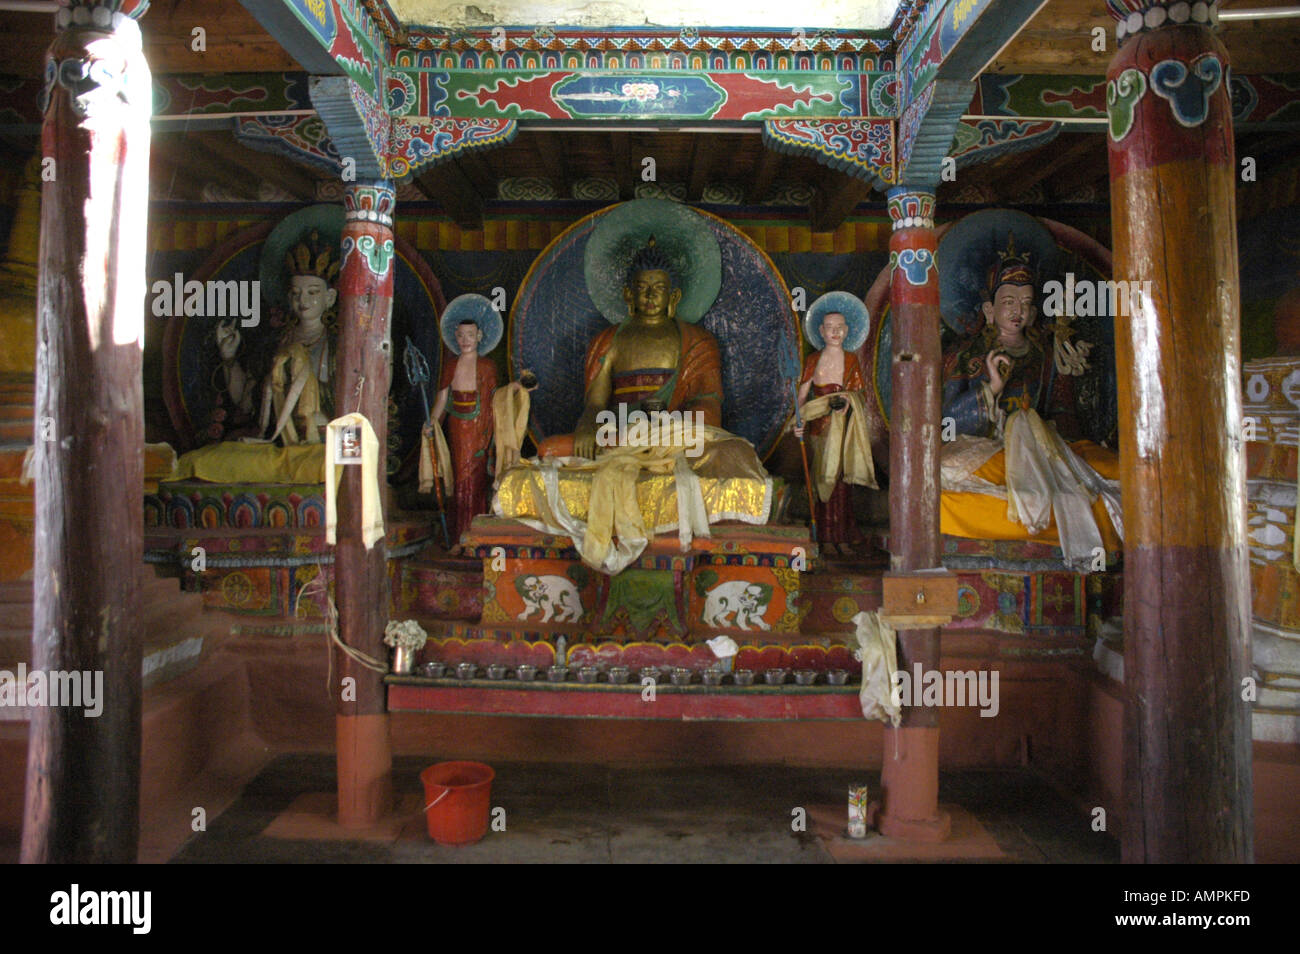 Colourful altar of a temple in Muktinath Mustang Annapurna Region Nepal Stock Photo